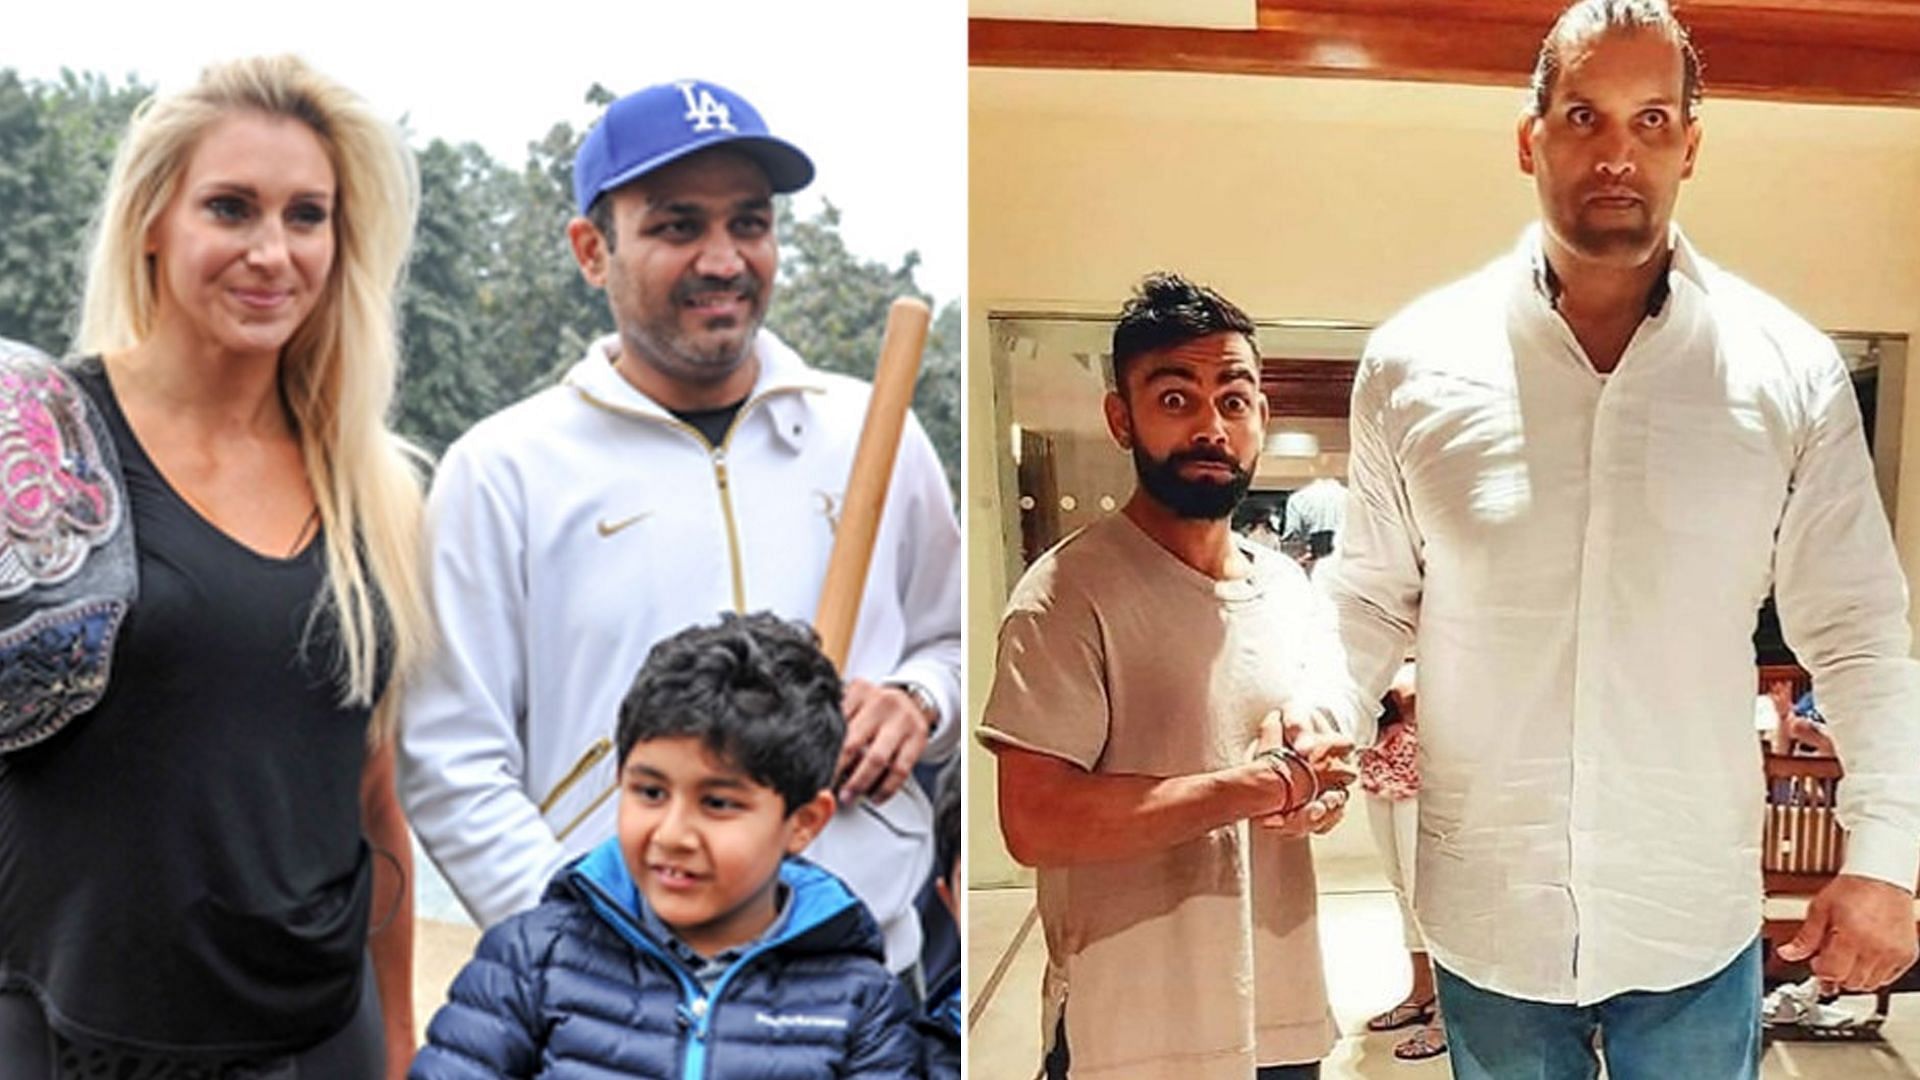 Kohli and Sehwag have shared quality moments with popular wrestlers